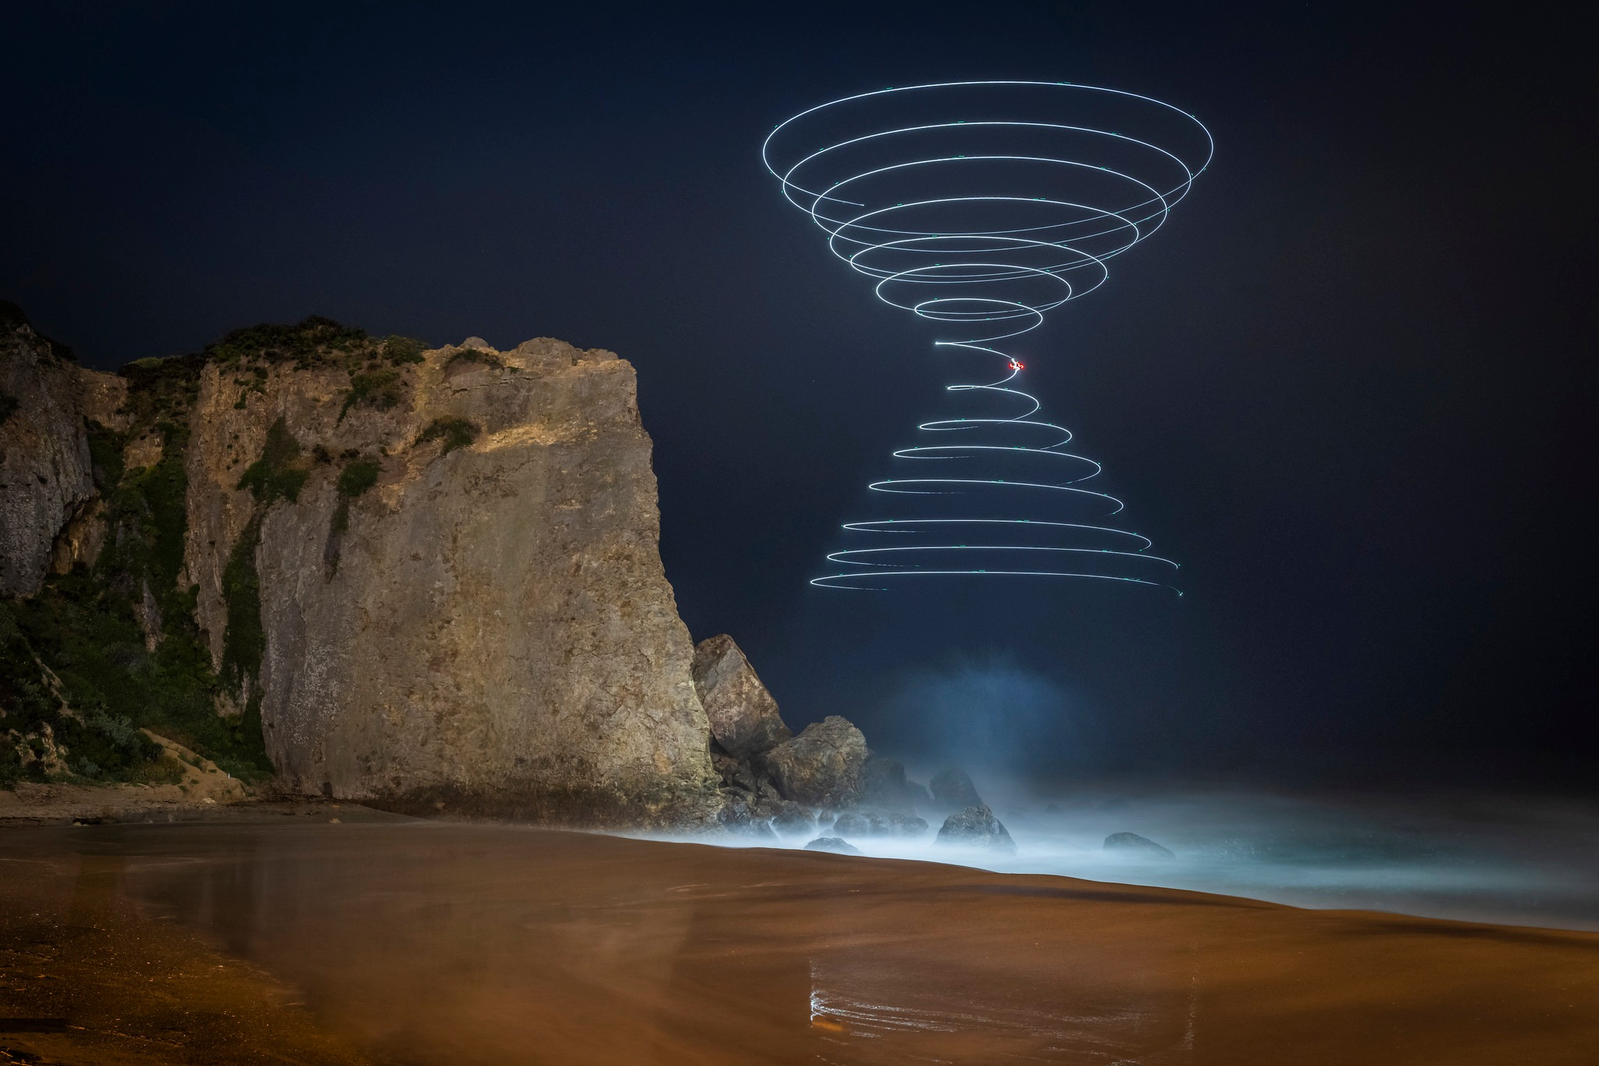 Drone Light Painting: Illuminating Artistry from Above